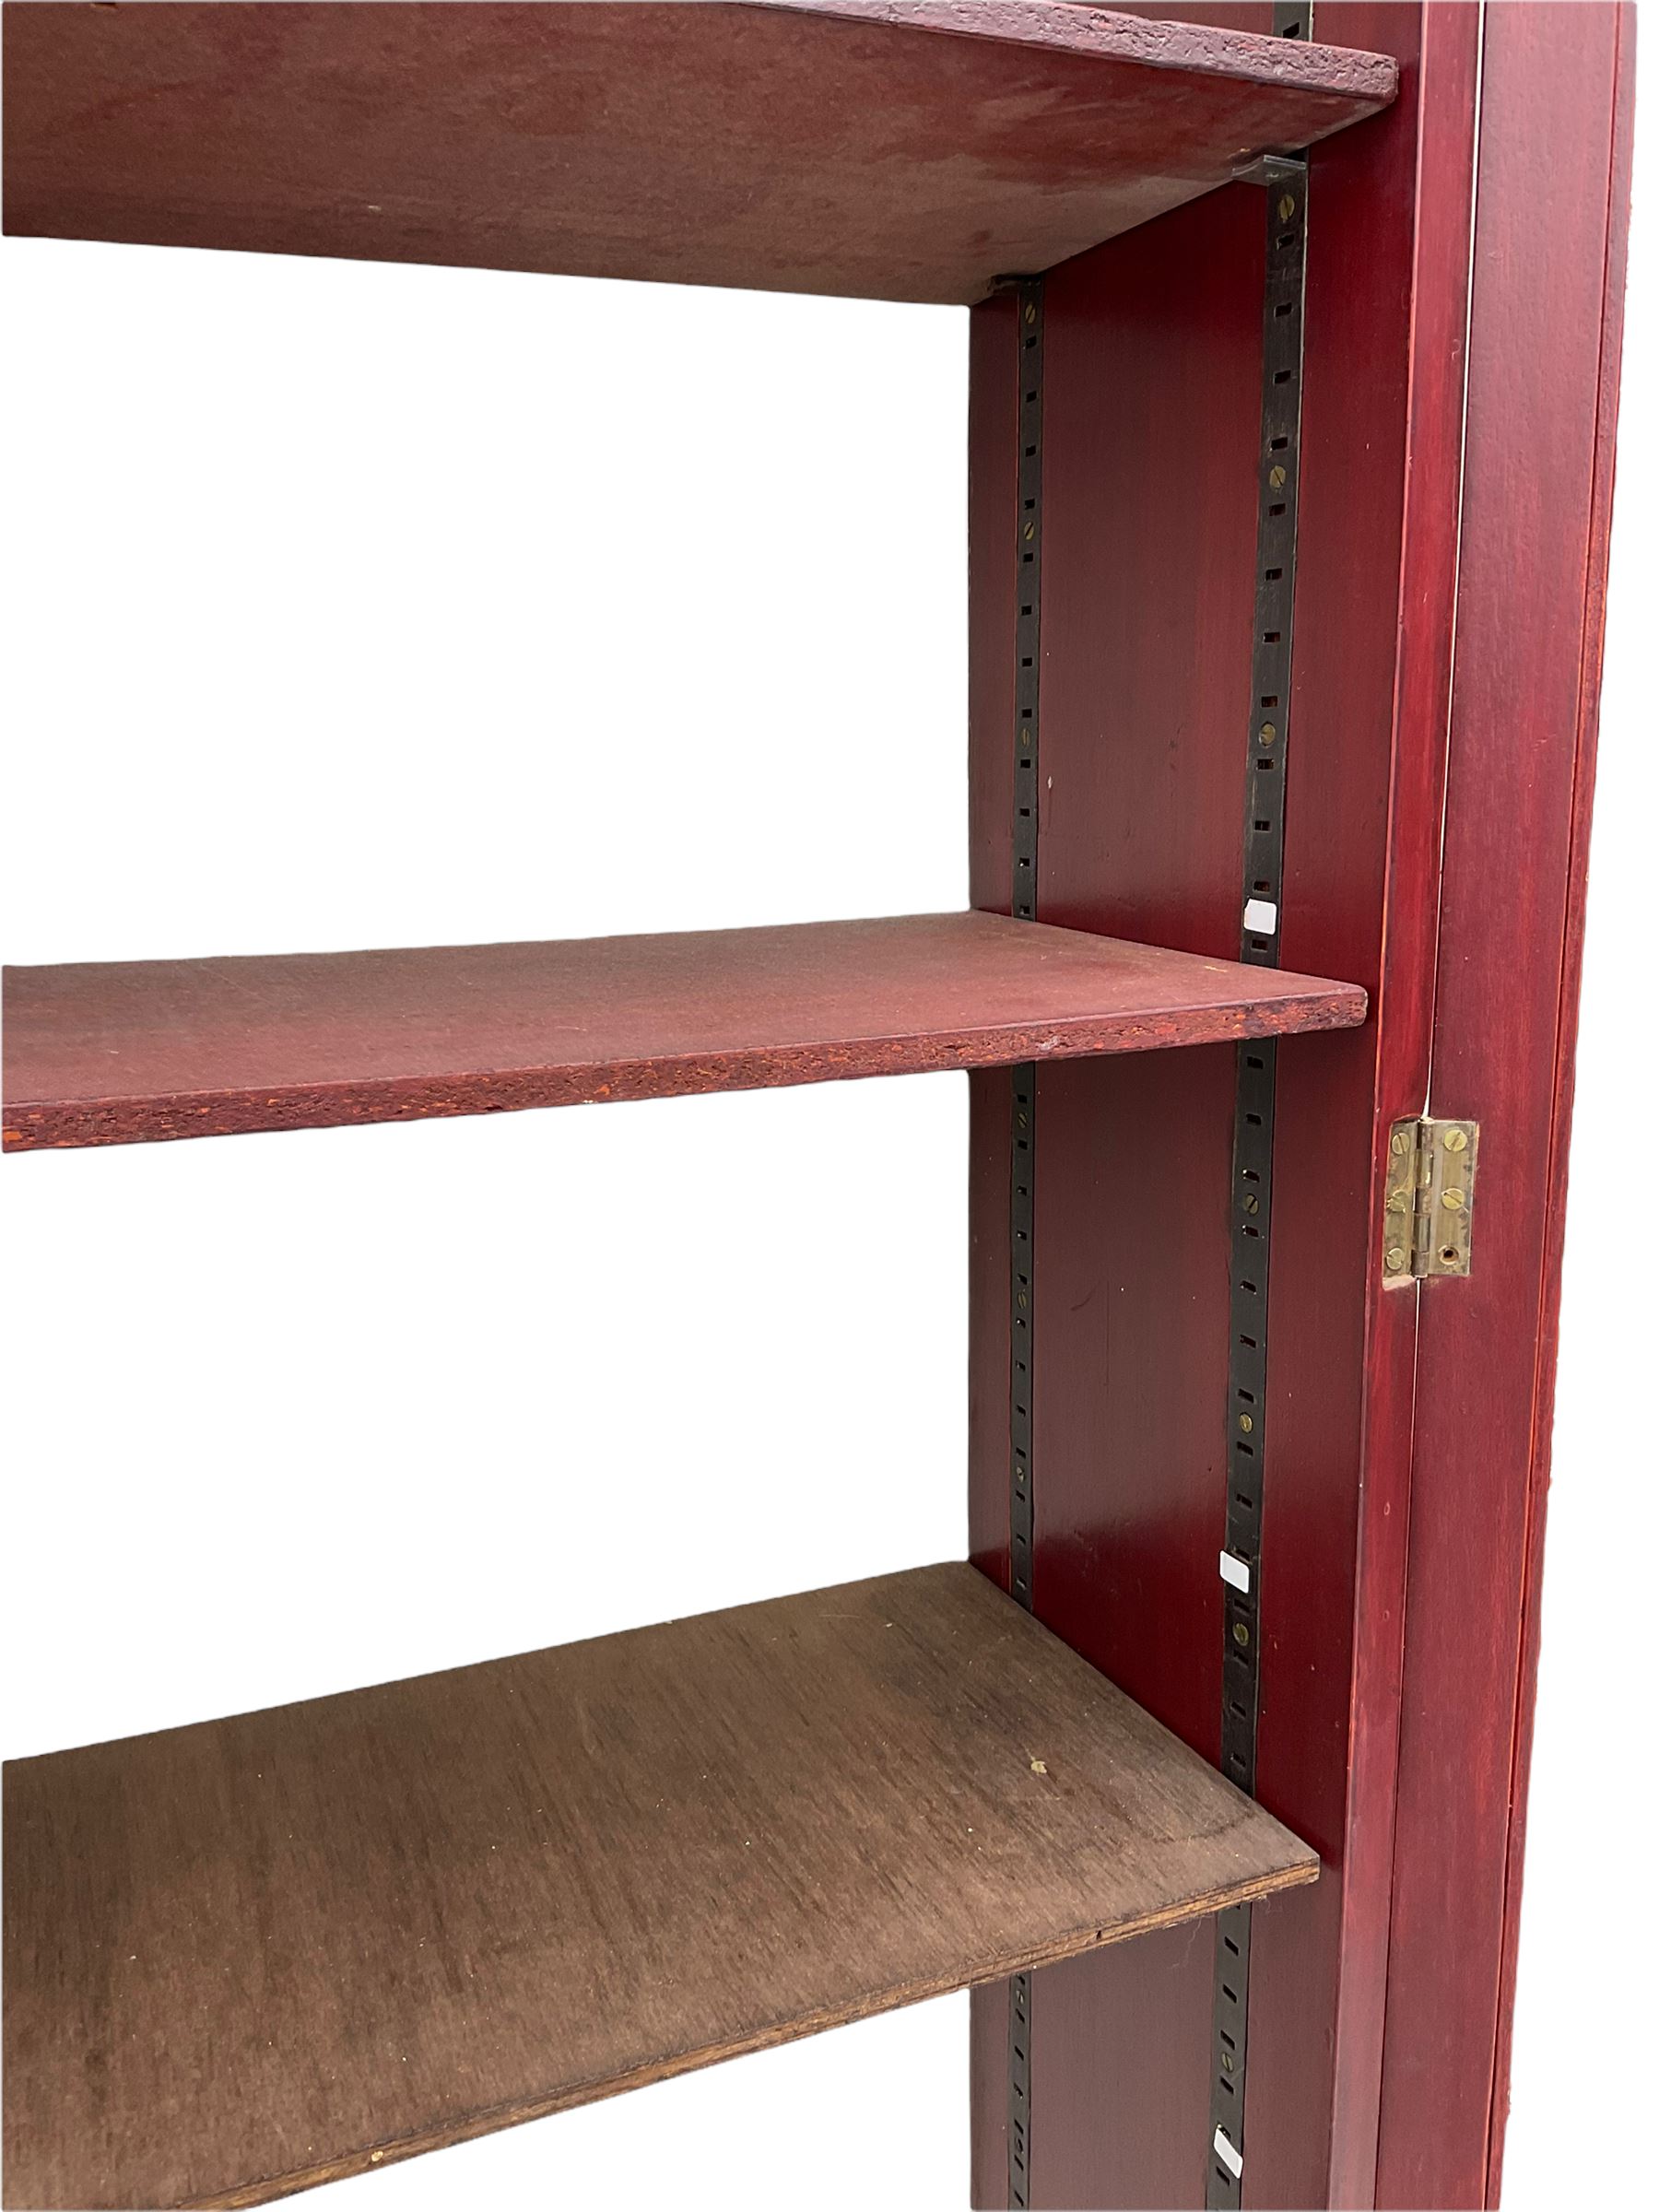 20th century glazed shop display cabinet/bookcase - Image 5 of 6